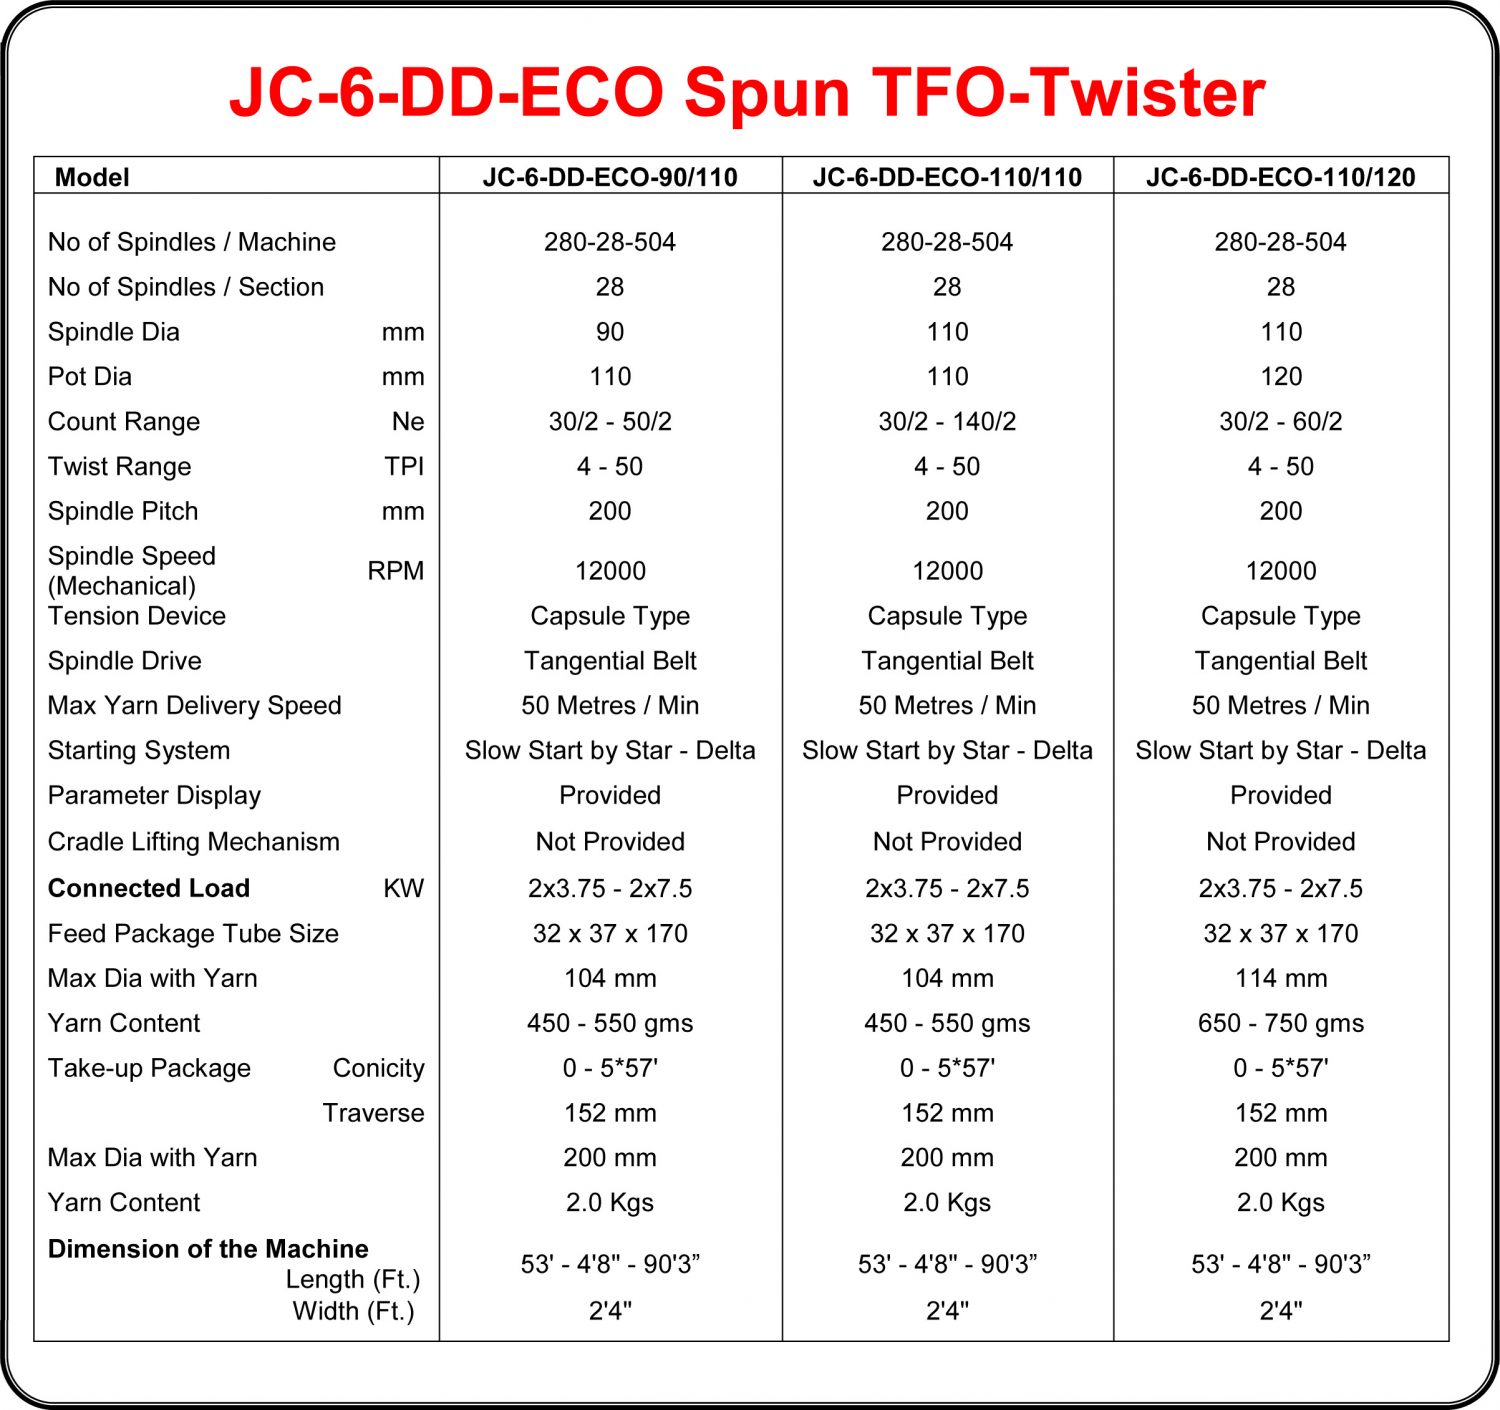 Double Deck ECO Spun TFO Technical Specifications